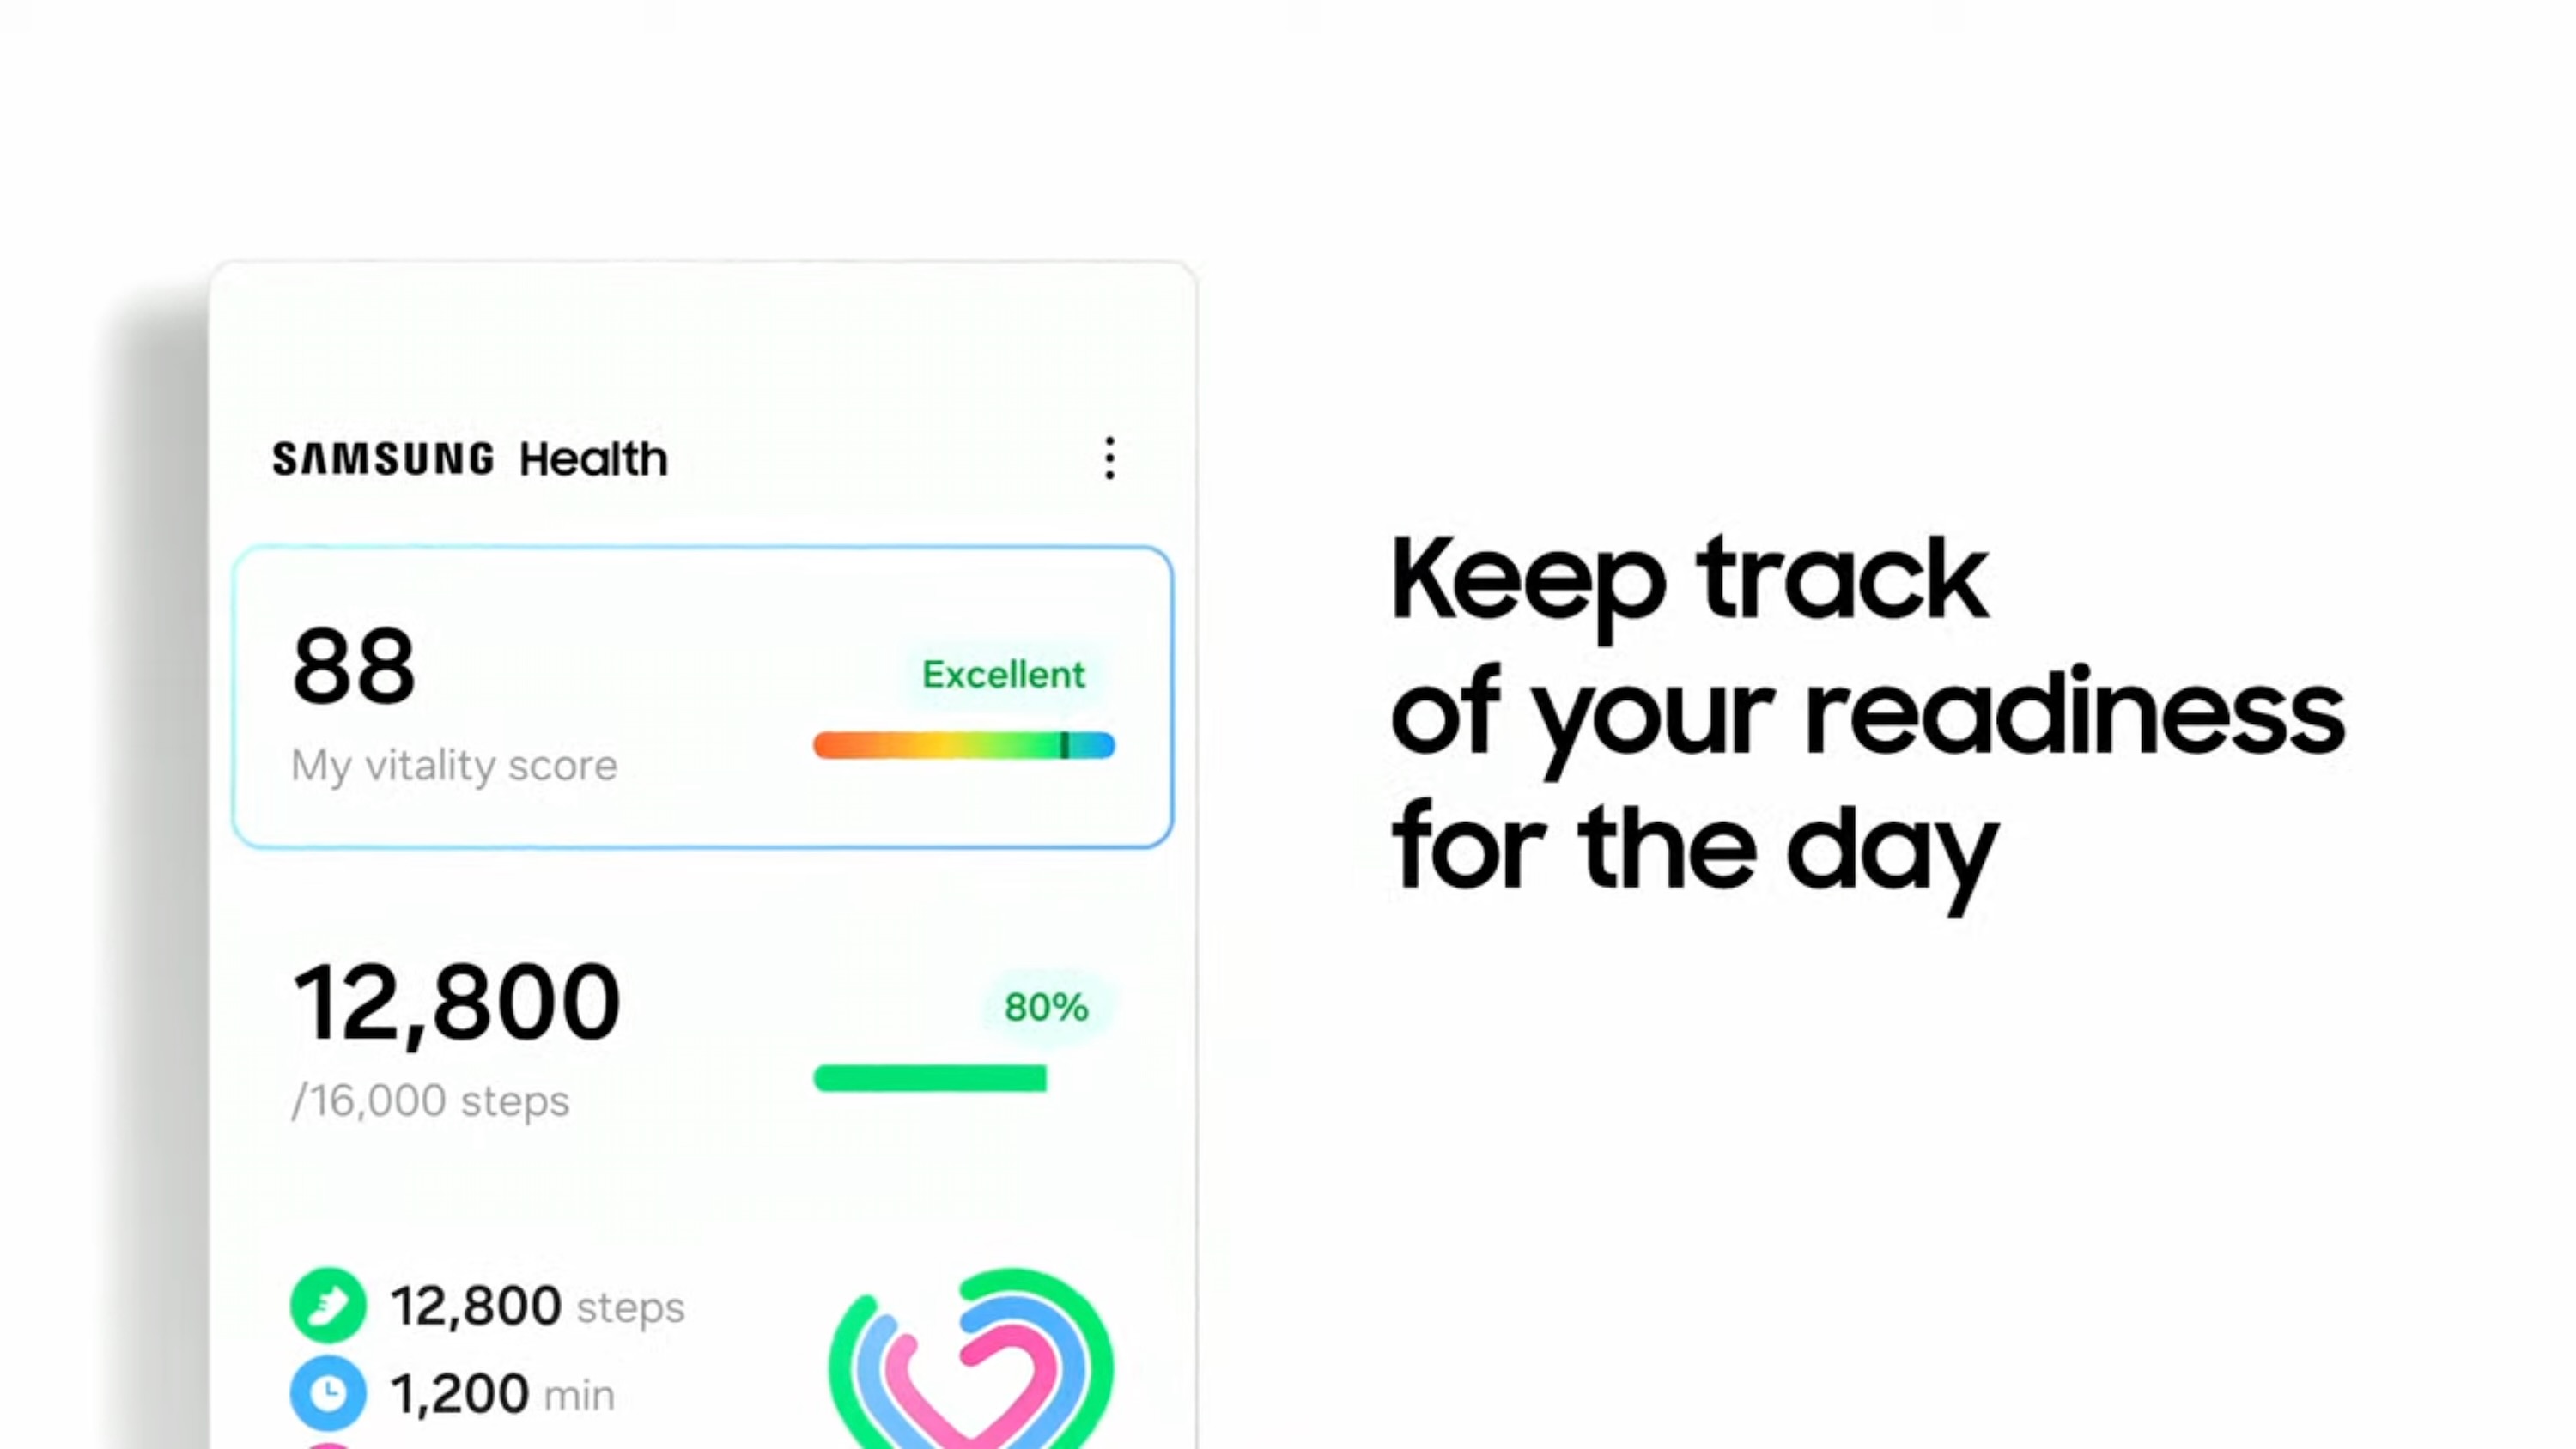 My Vitality score reveal showing new Samsung Health feature launching later this year.